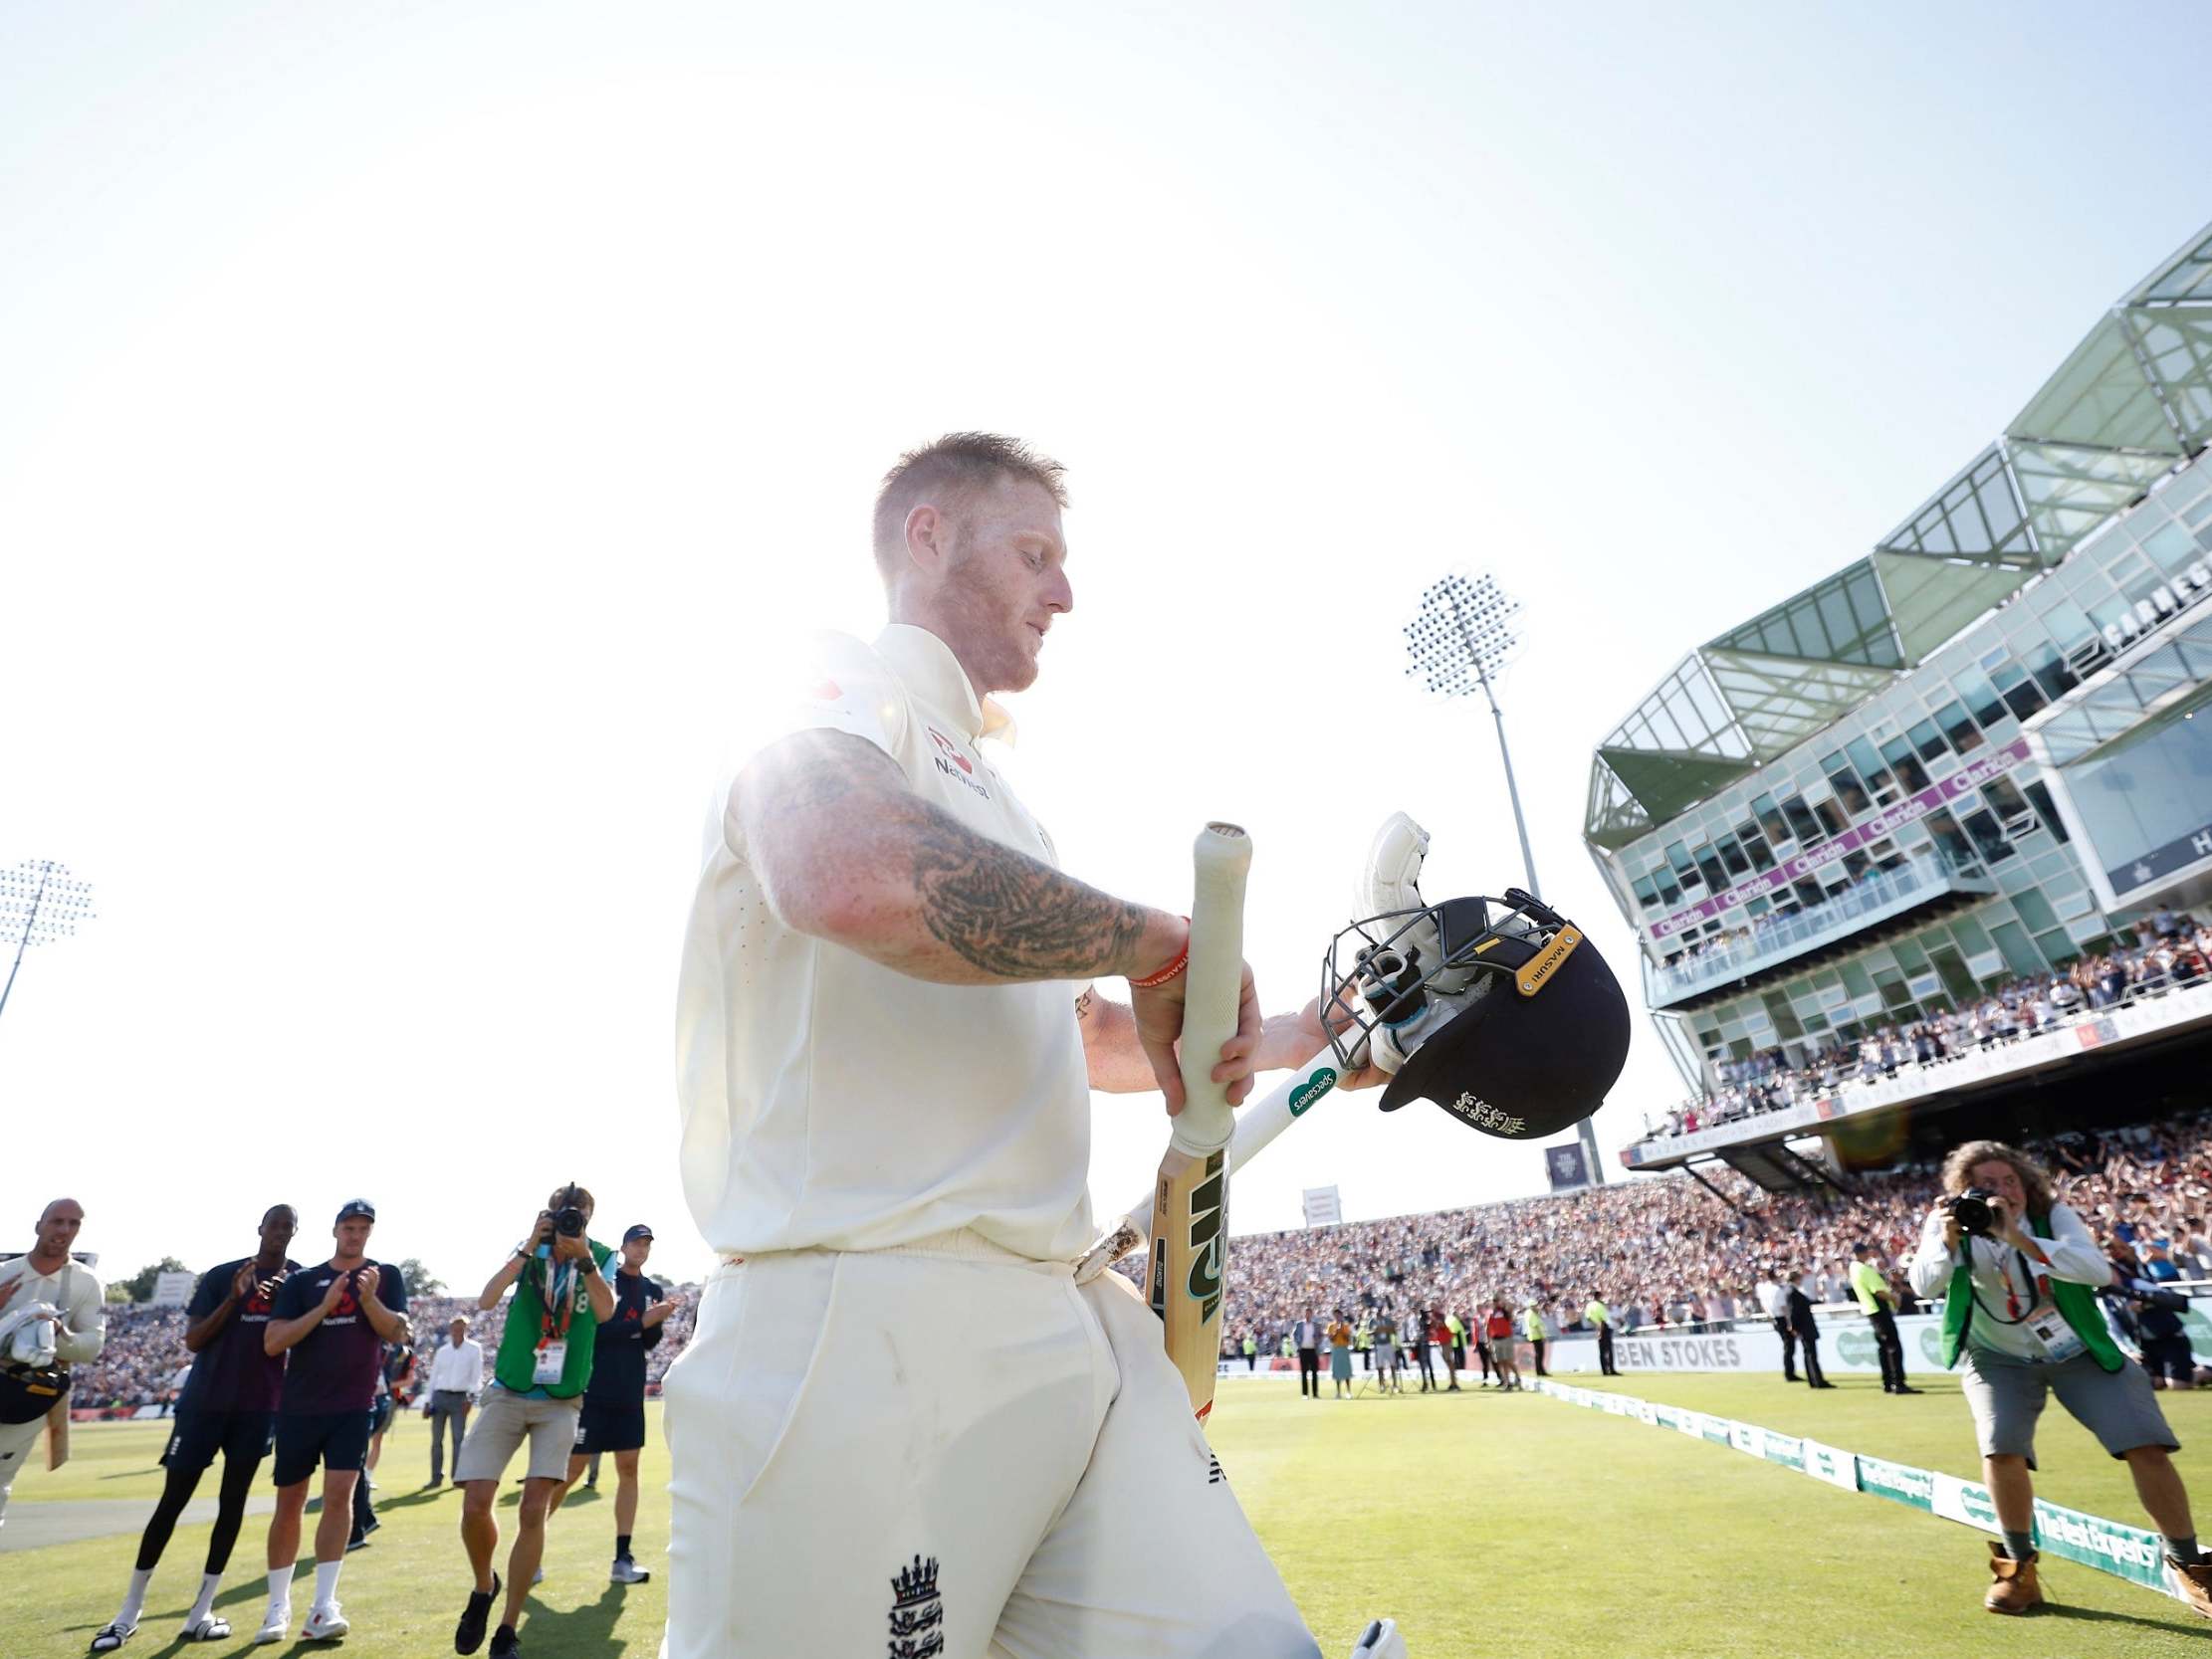 Ben Stokes leaves the field after his stunning innings